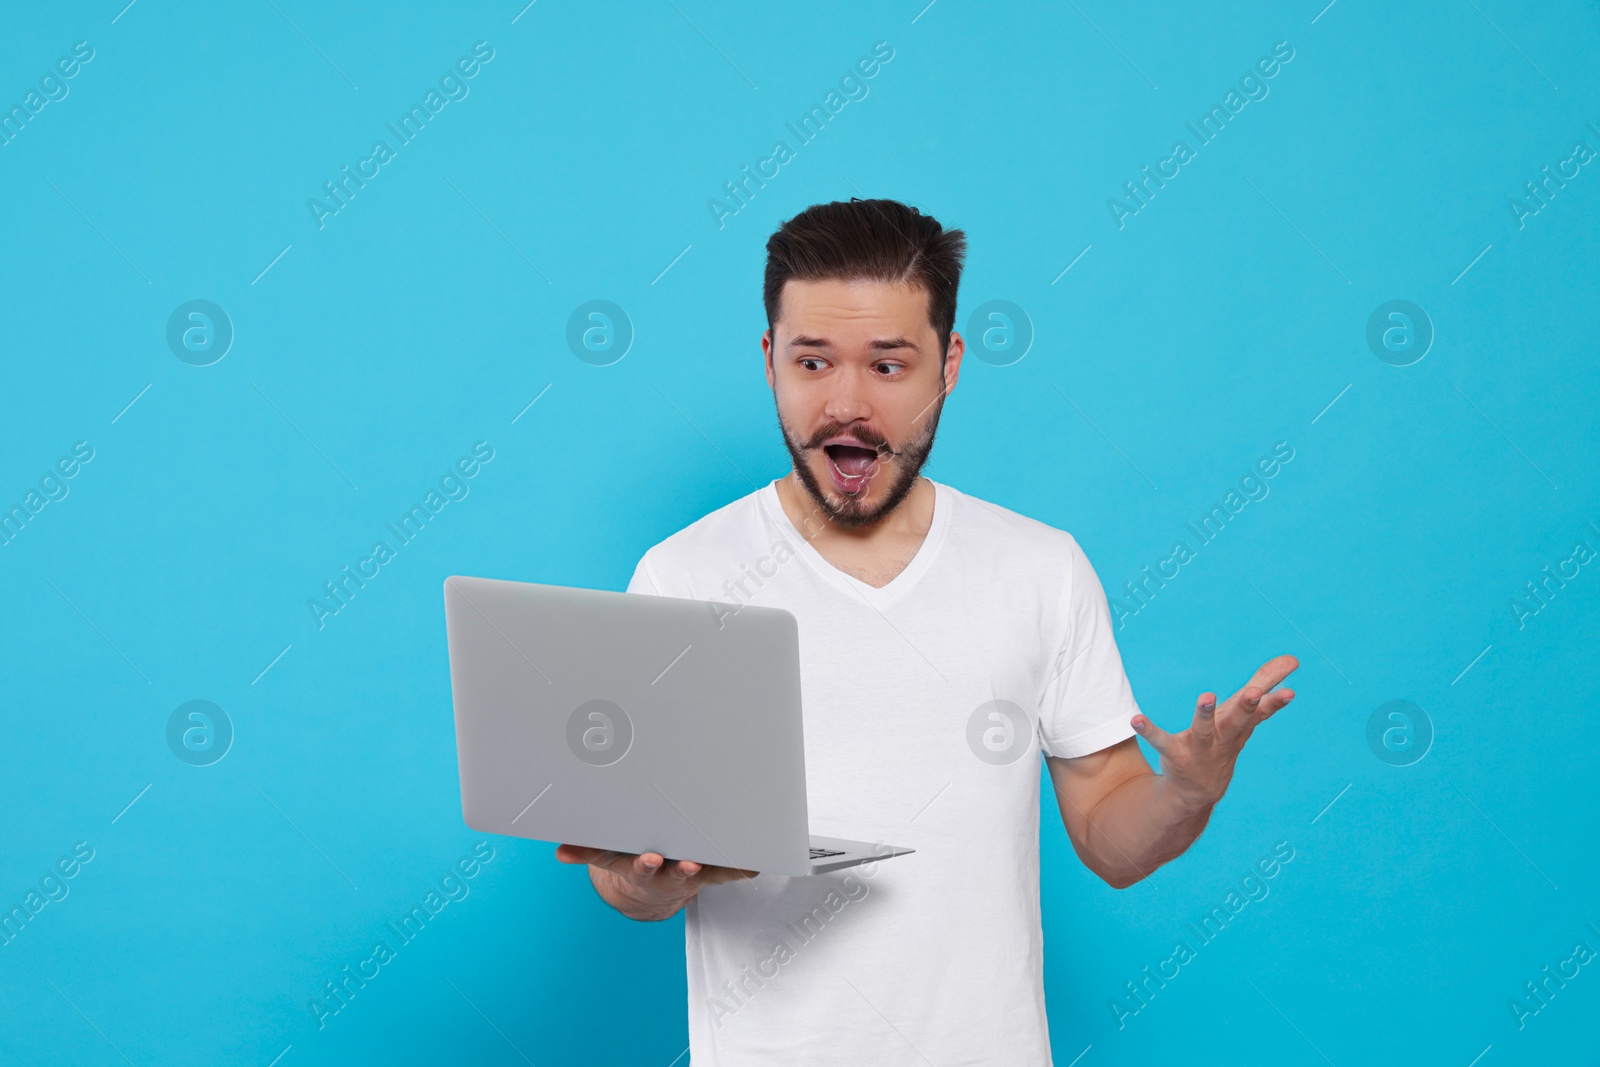 Photo of Emotional man looking at laptop on light blue background